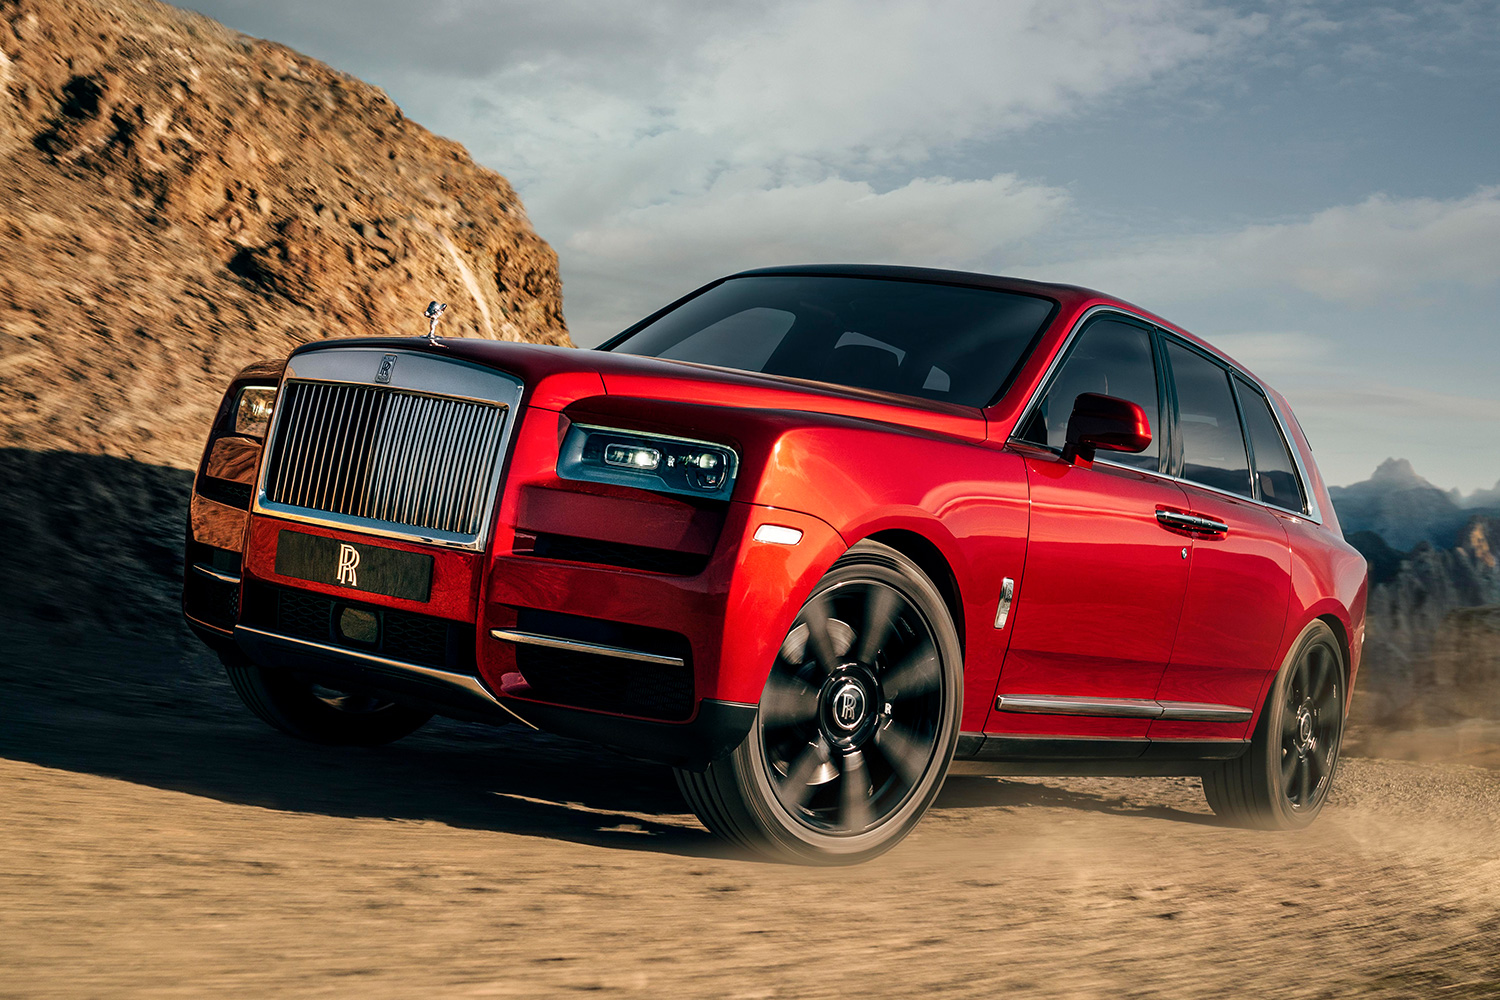 The Rolls-Royce Cullinan SUV, which is a sales leader for the brand to this day